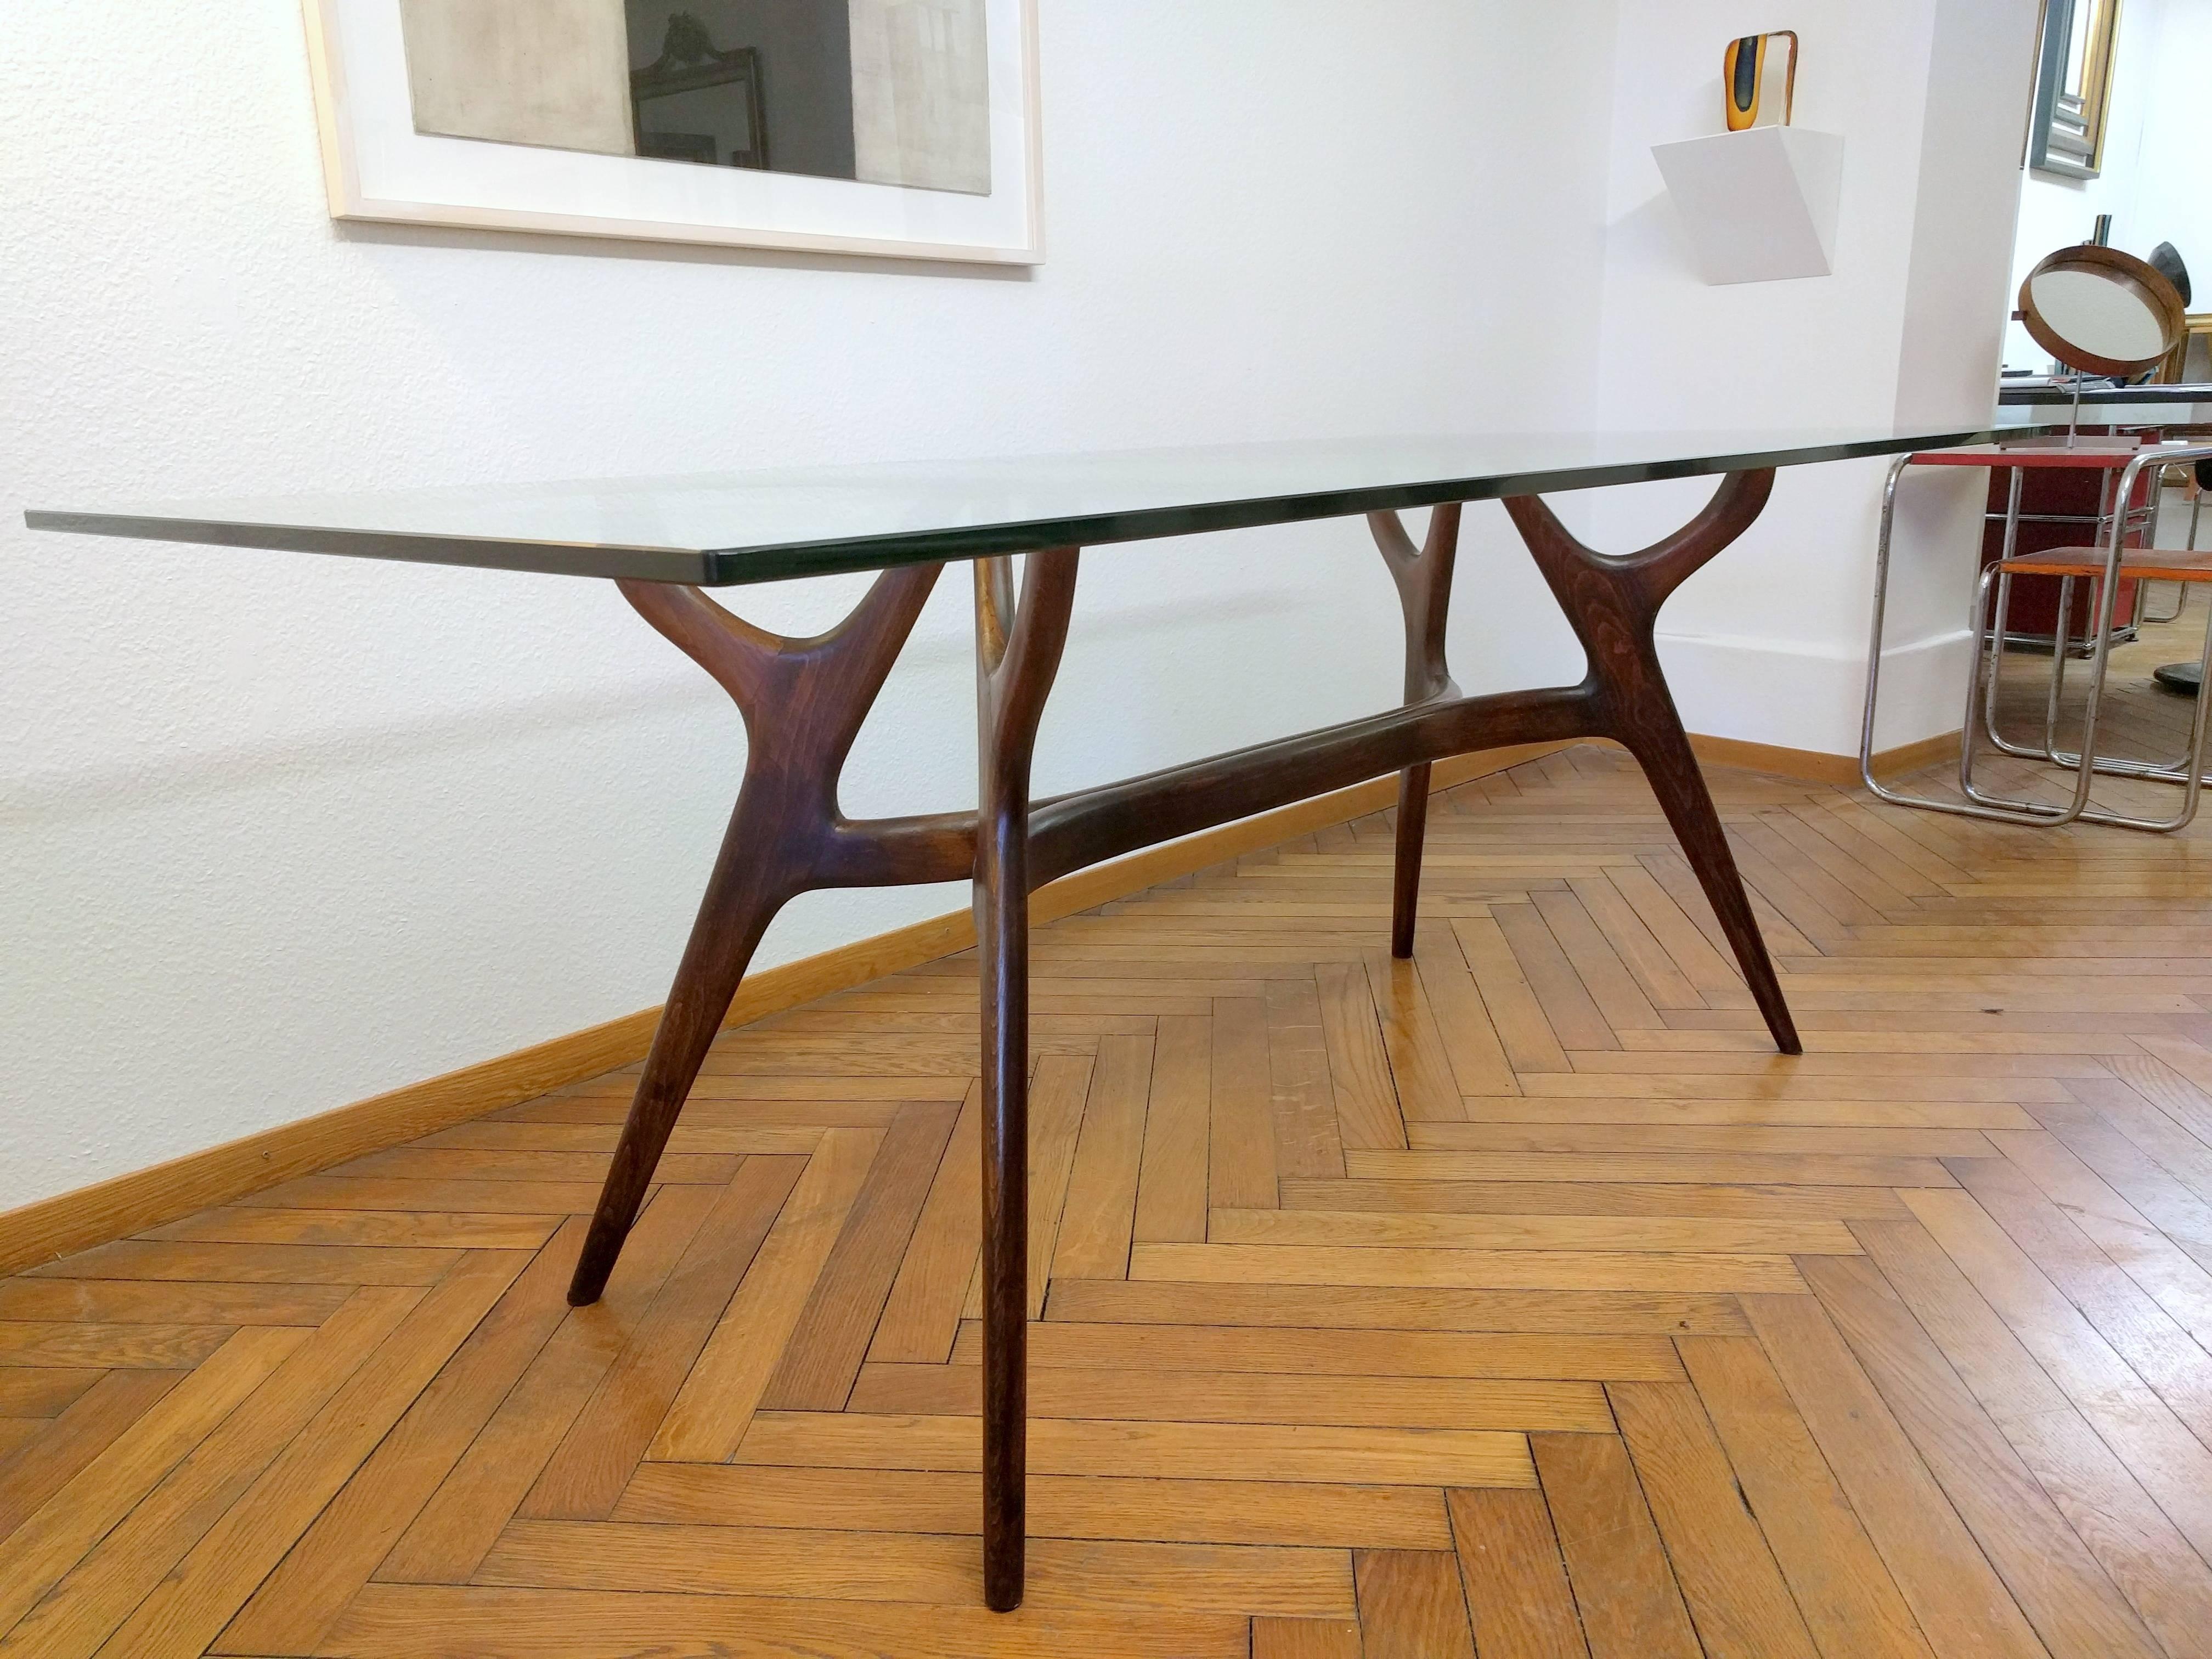 Mid-Century Modern Beautiful Table Designed by Ico Parisi Made by Palisander, 1960 For Sale